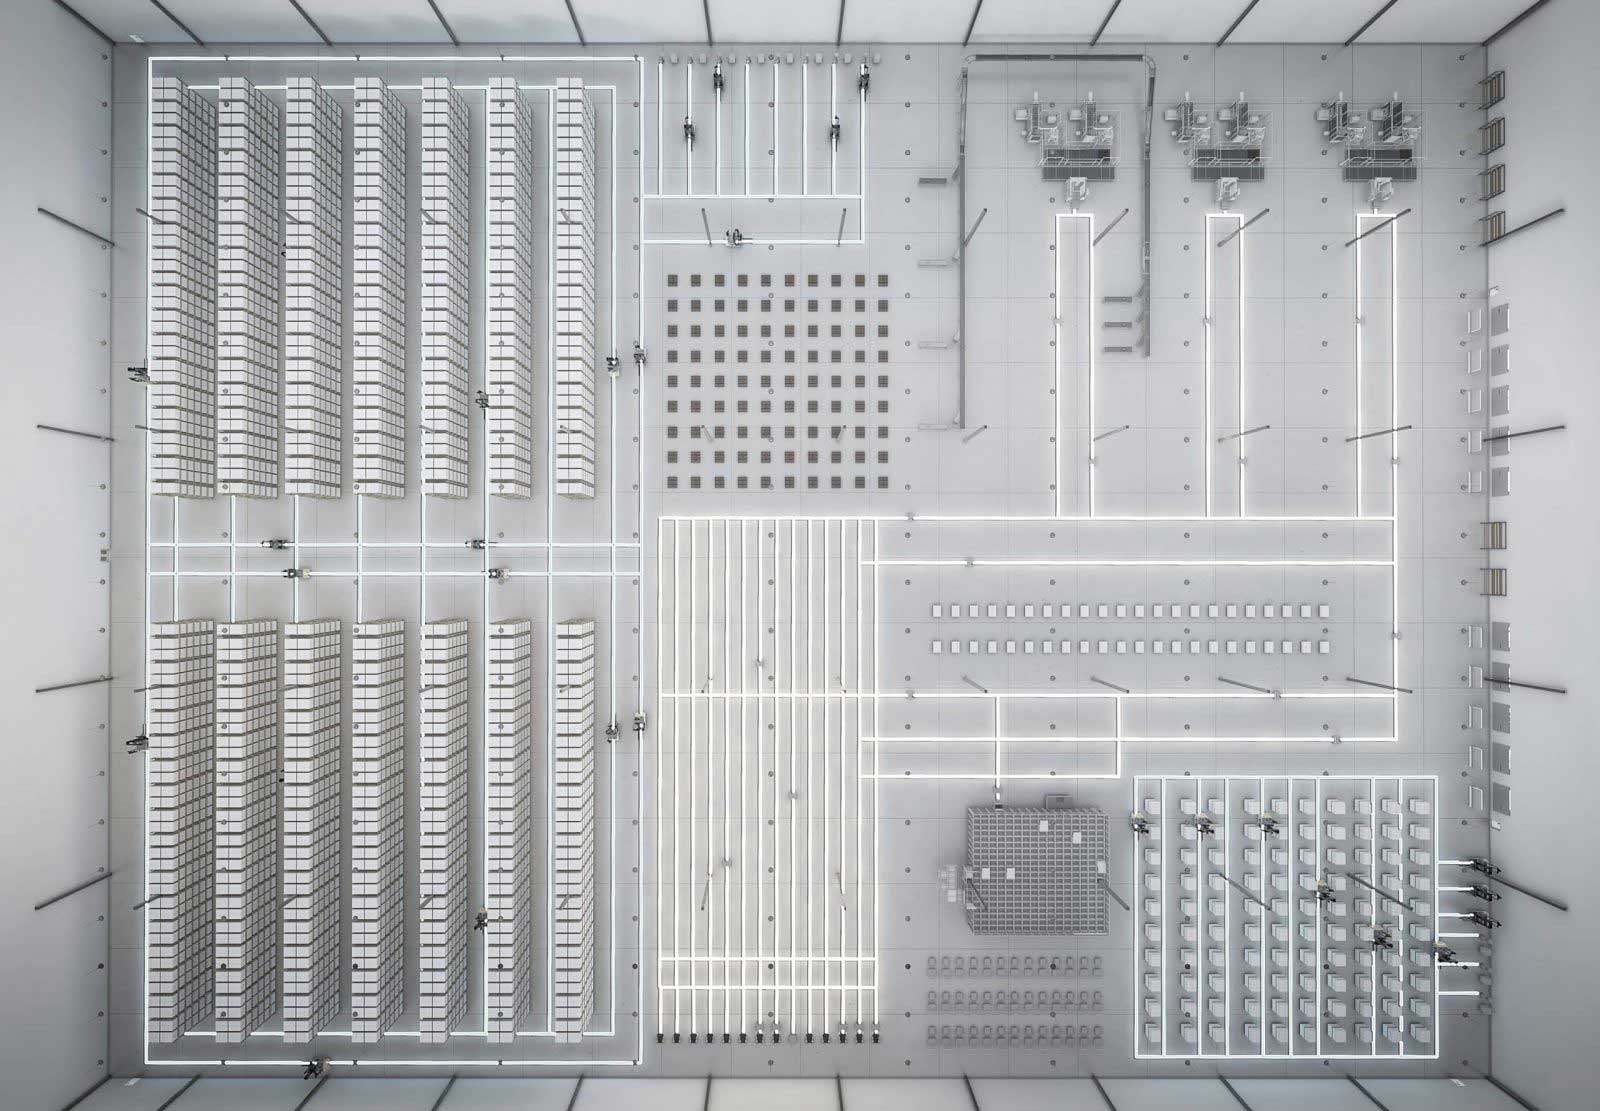 Aerial view of an organized warehouse rendering showcasing an array of racking systems as part of a 'Project Execution' display. Different sections exhibit selective racks, drive-in racks, and flow racks with designated aisles for material handling equipment. The strategic arrangement illustrates an efficient space utilization concept, embodying KPI Solutions' philosophy for enhancing supply chain functionality.